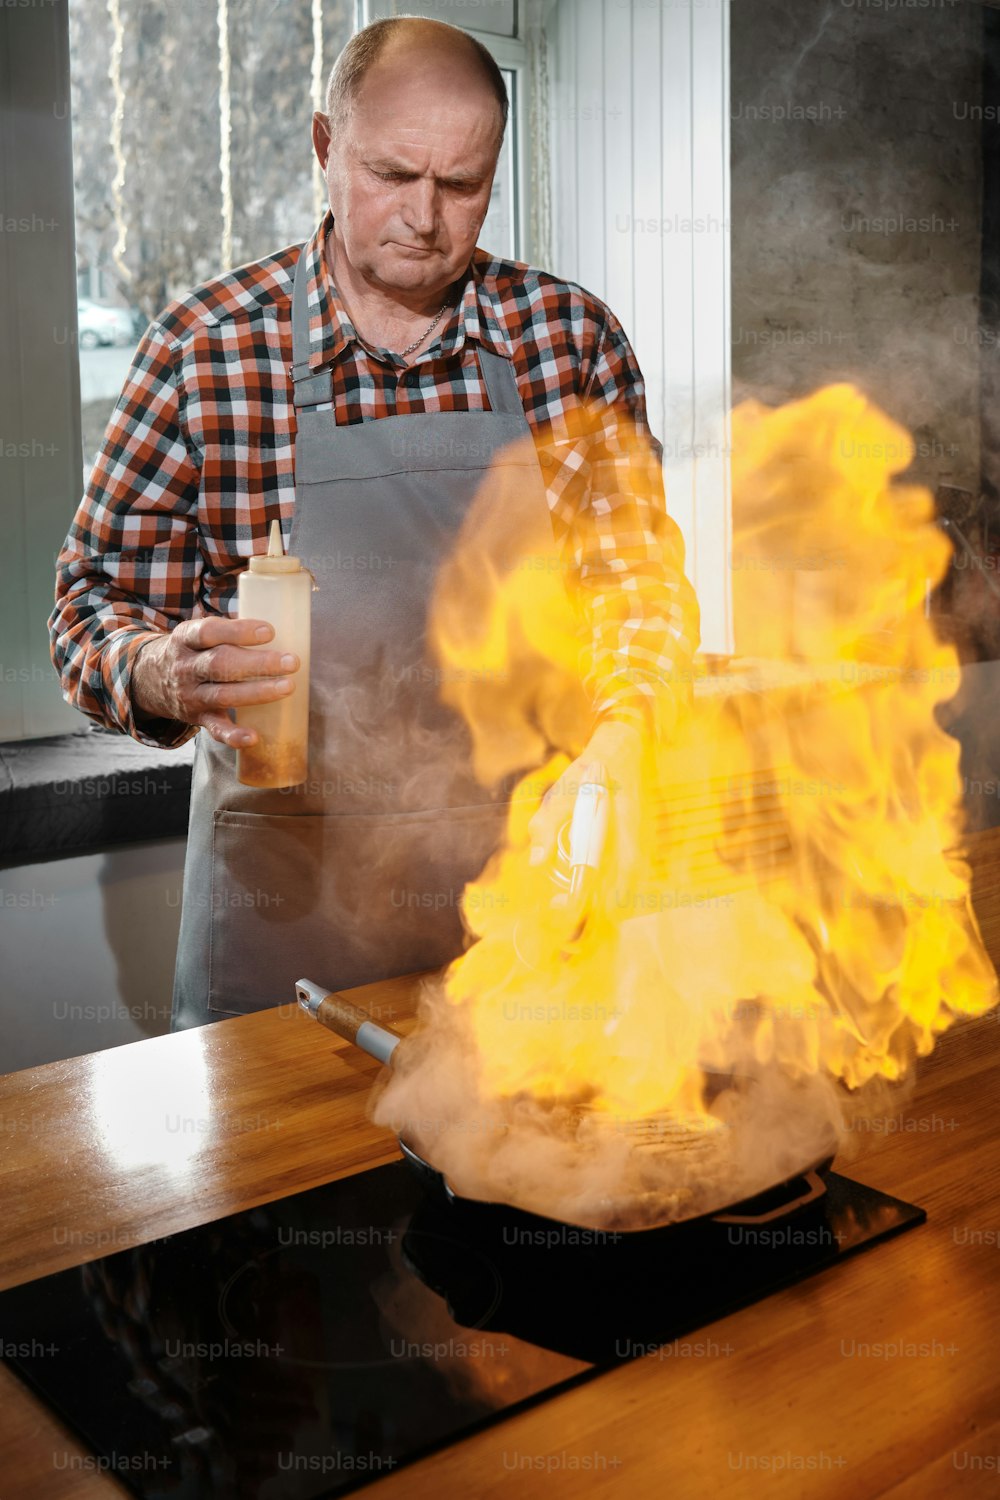 a man in an apron is cooking on a stove